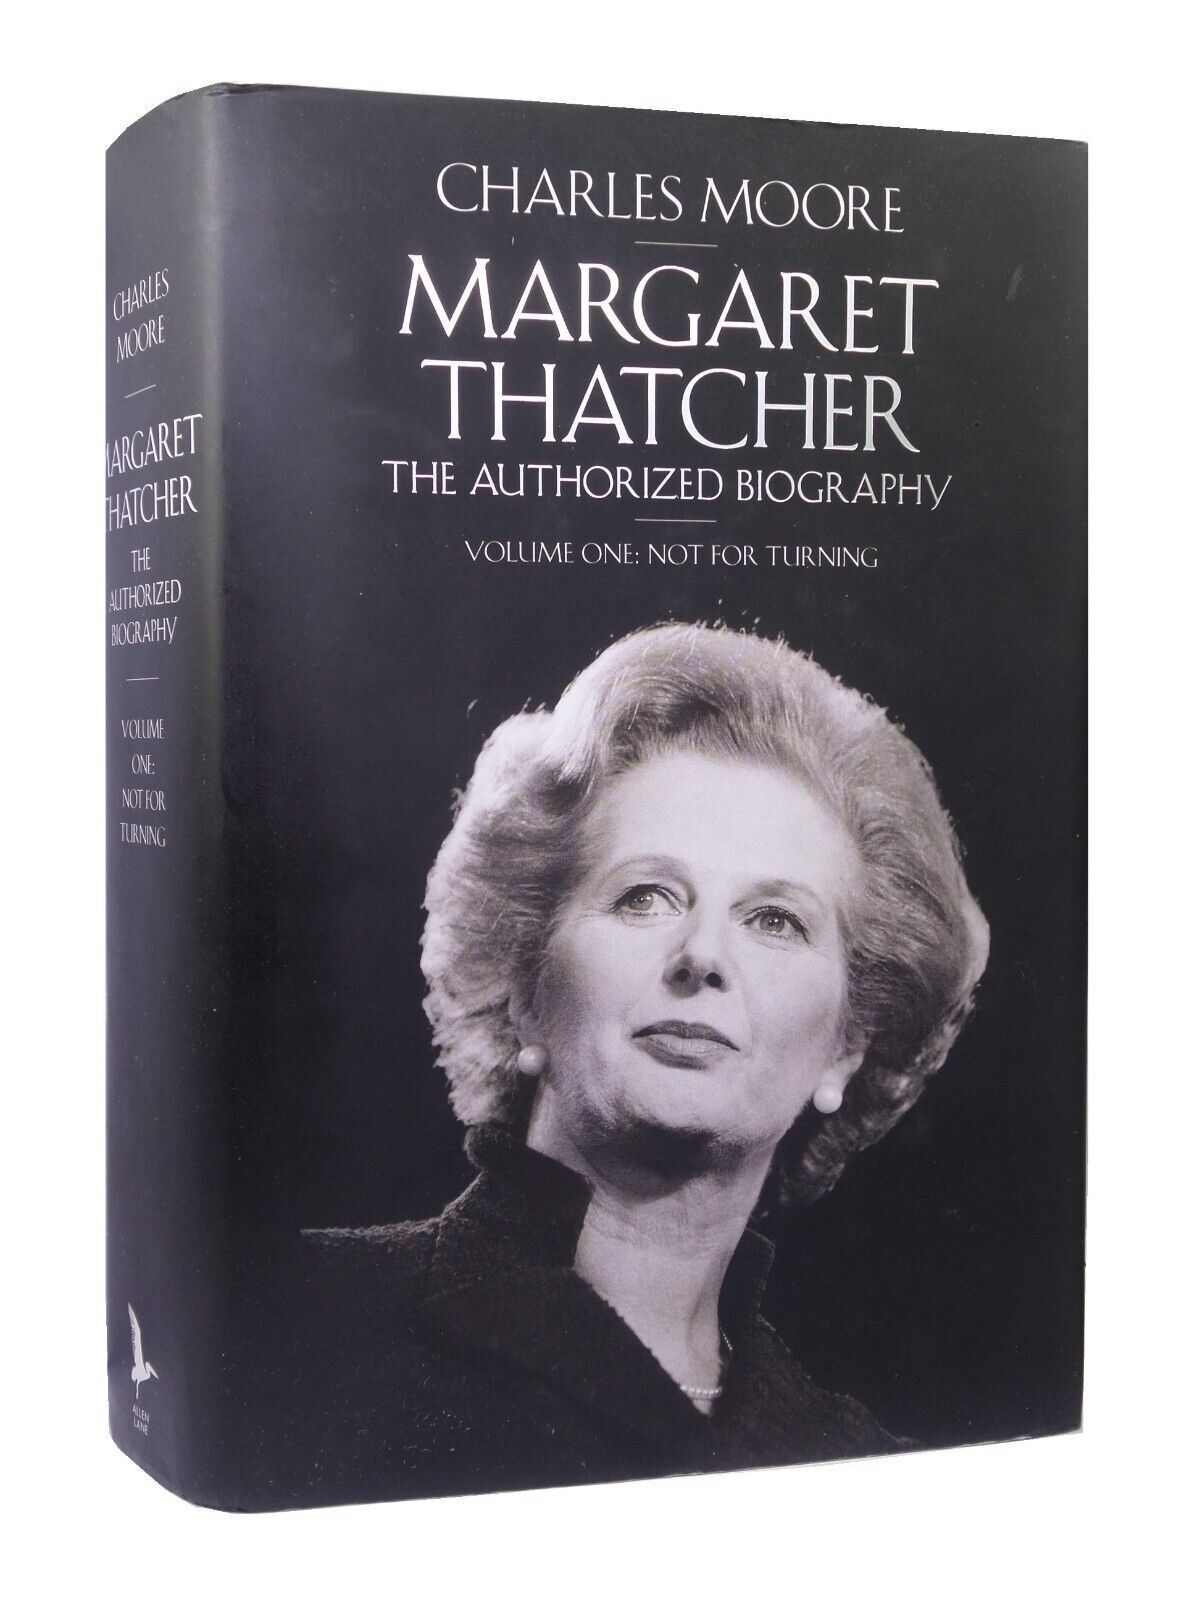 MARGARET THATCHER: THE AUTHORIZED BIOGRAPHY 2013 VOLUME ONE, SIGNED BY AUTHOR